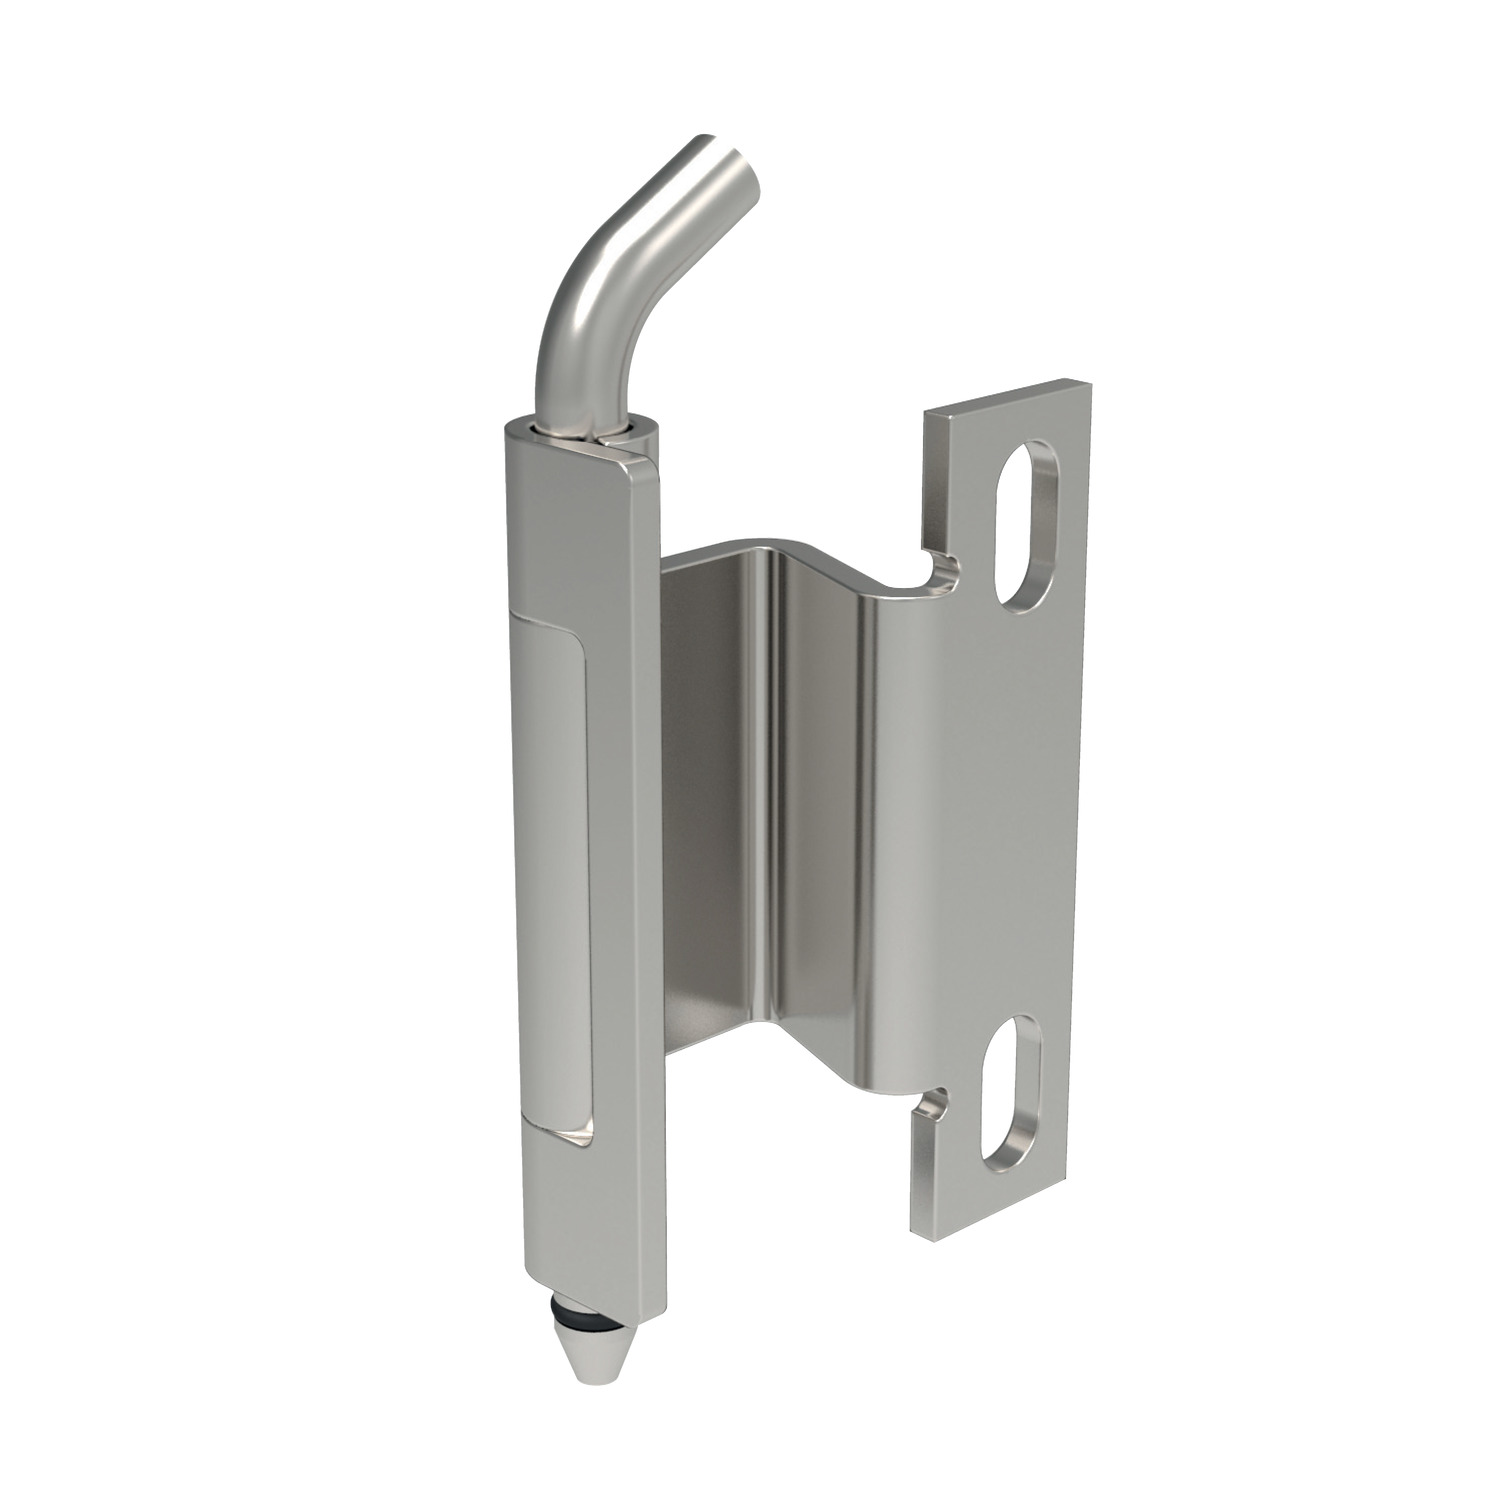 Concealed Pivot Hinges - Lift Off Concealed pivot hinges for doors with a 20 - 24mm door return. Weld and oval head screw.